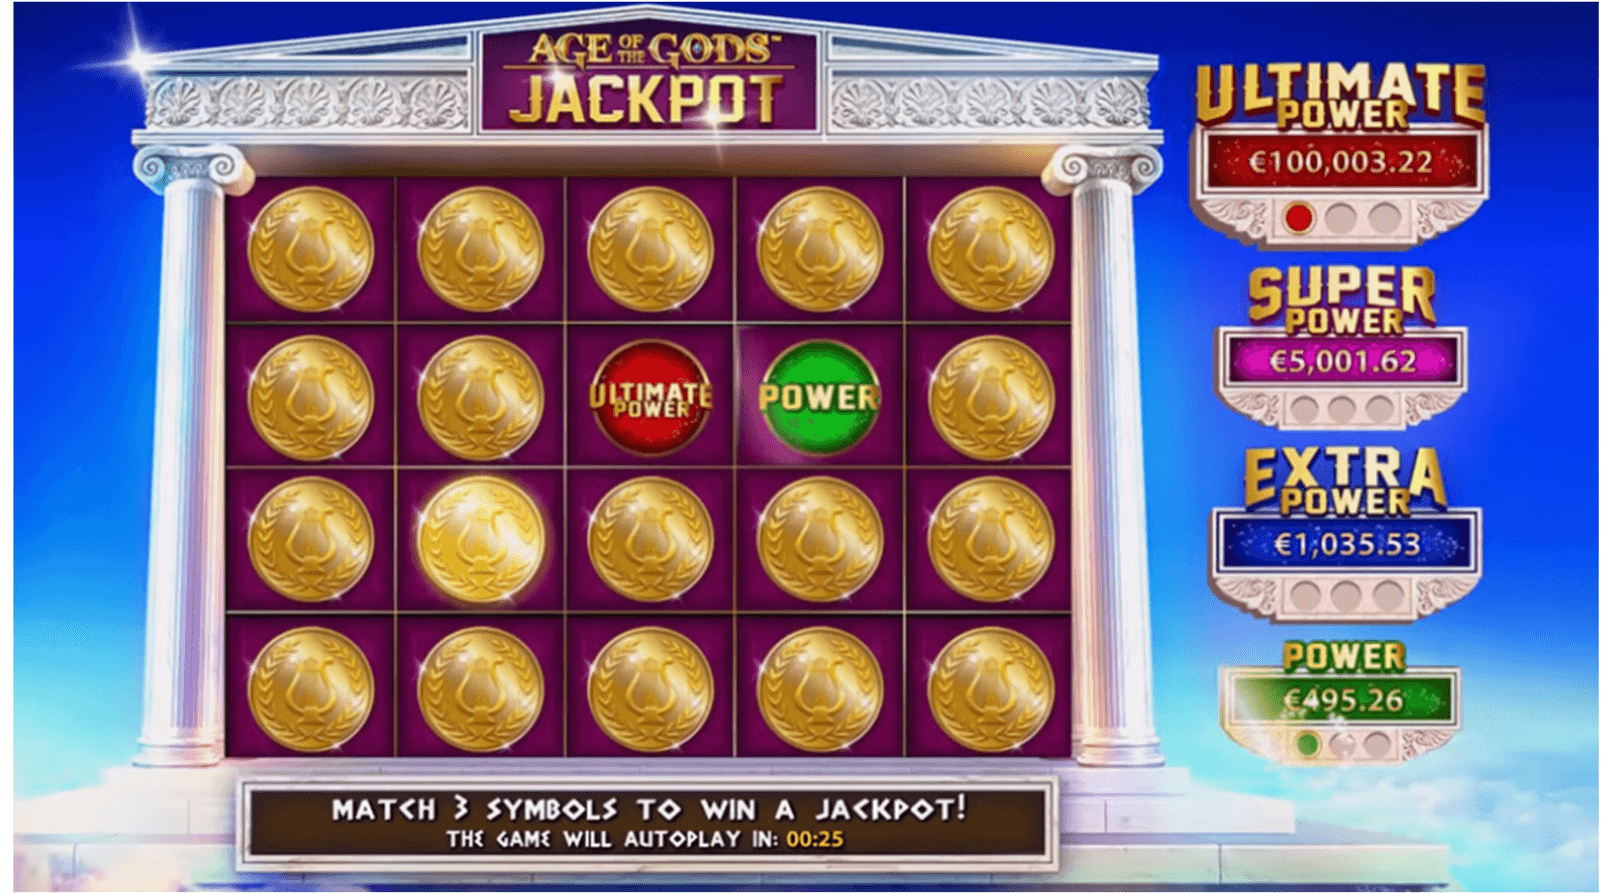 Age of the Gods slot jackpot feature